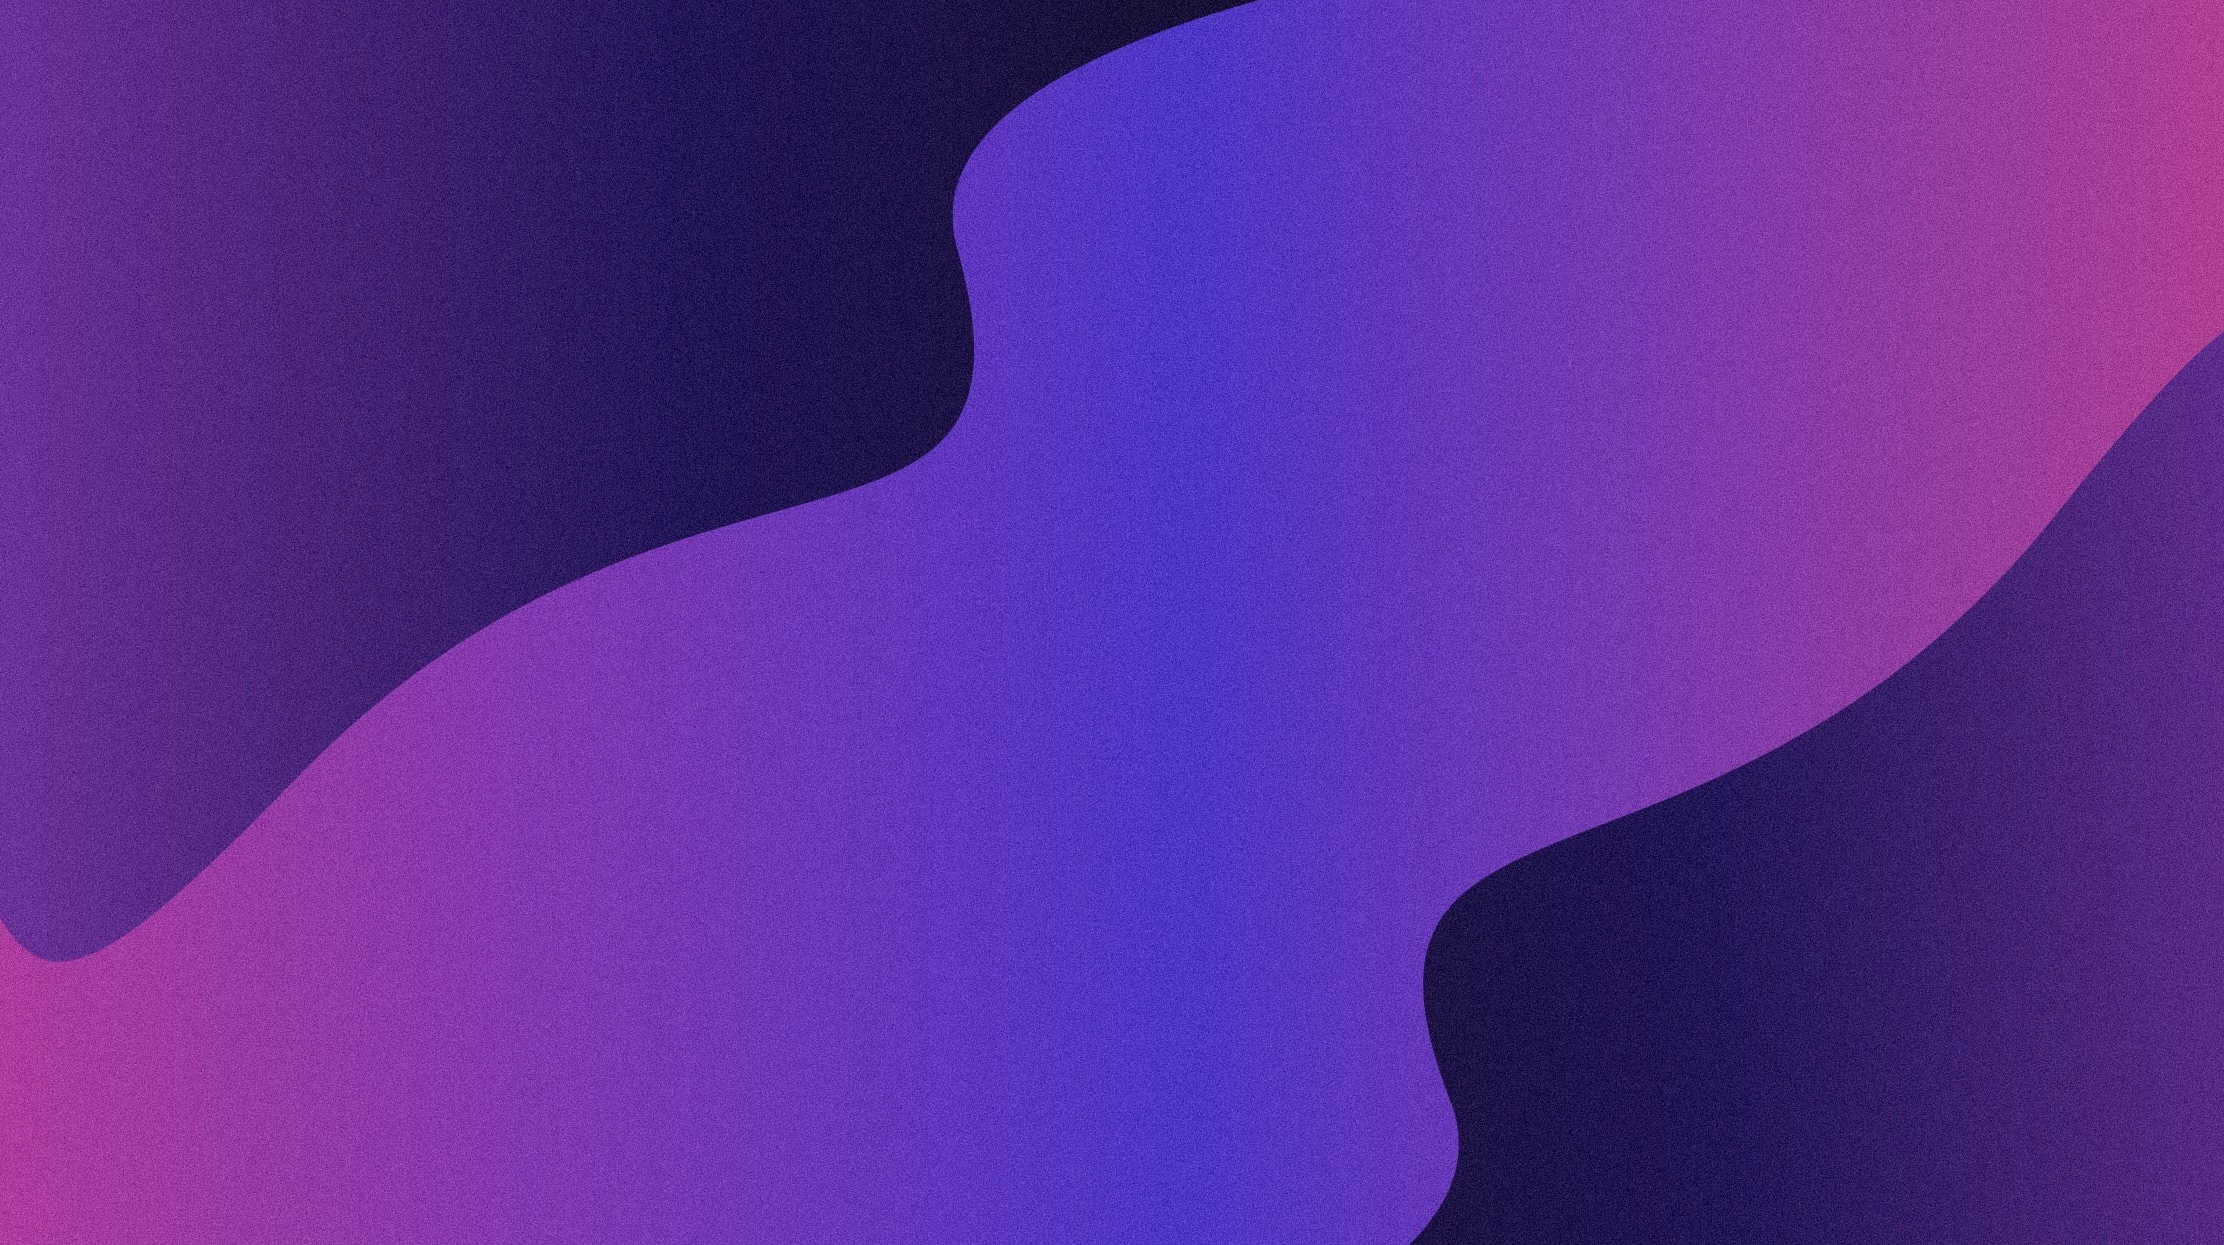 made some minimalist wallpapers inspired by the iPad Air and iPhone colors  some others 3840x2160  rwallpaper